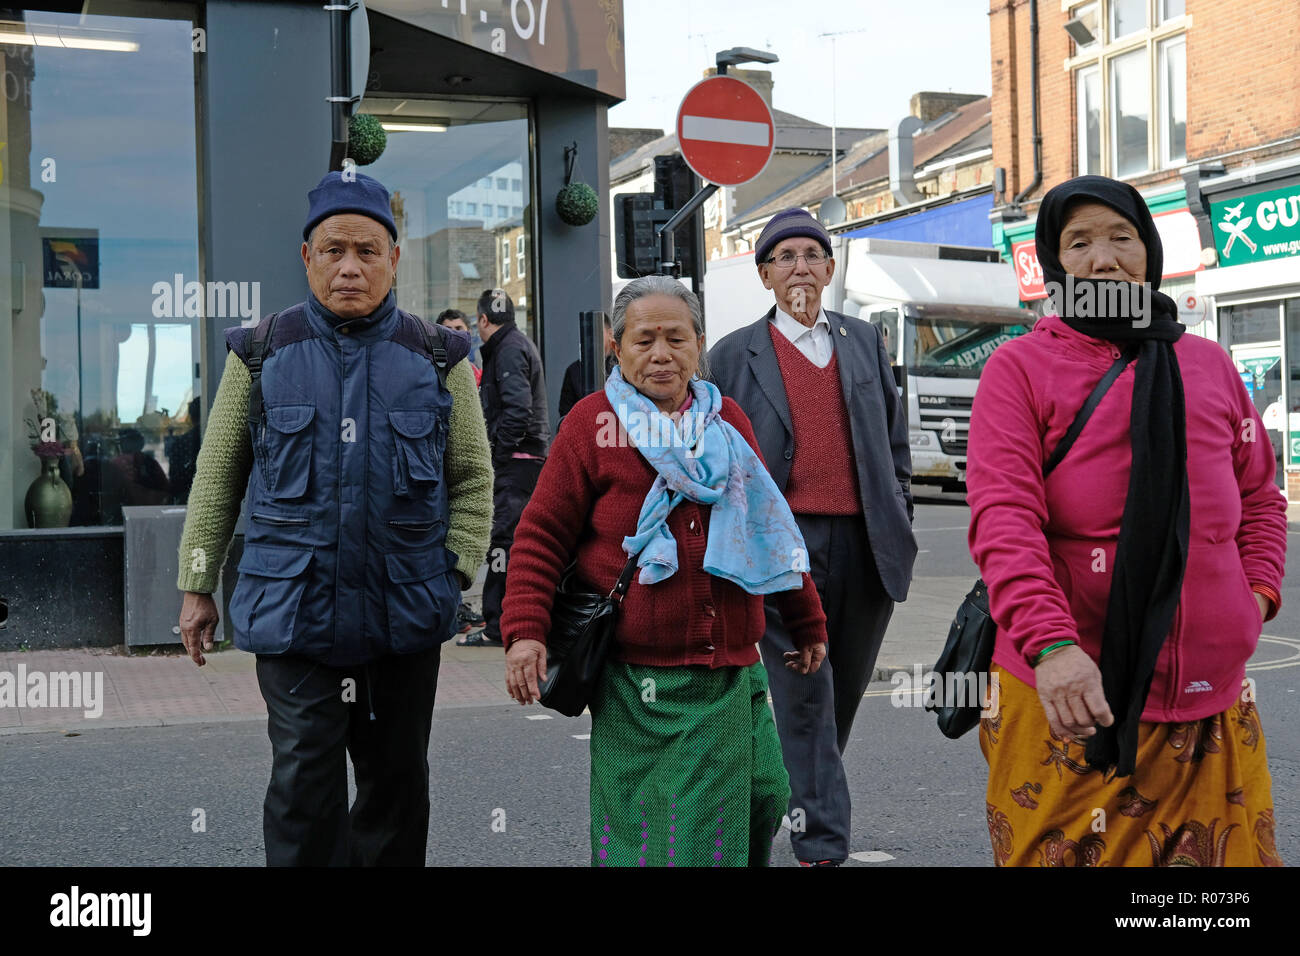 Old Nepalese people in the UK Stock Photo